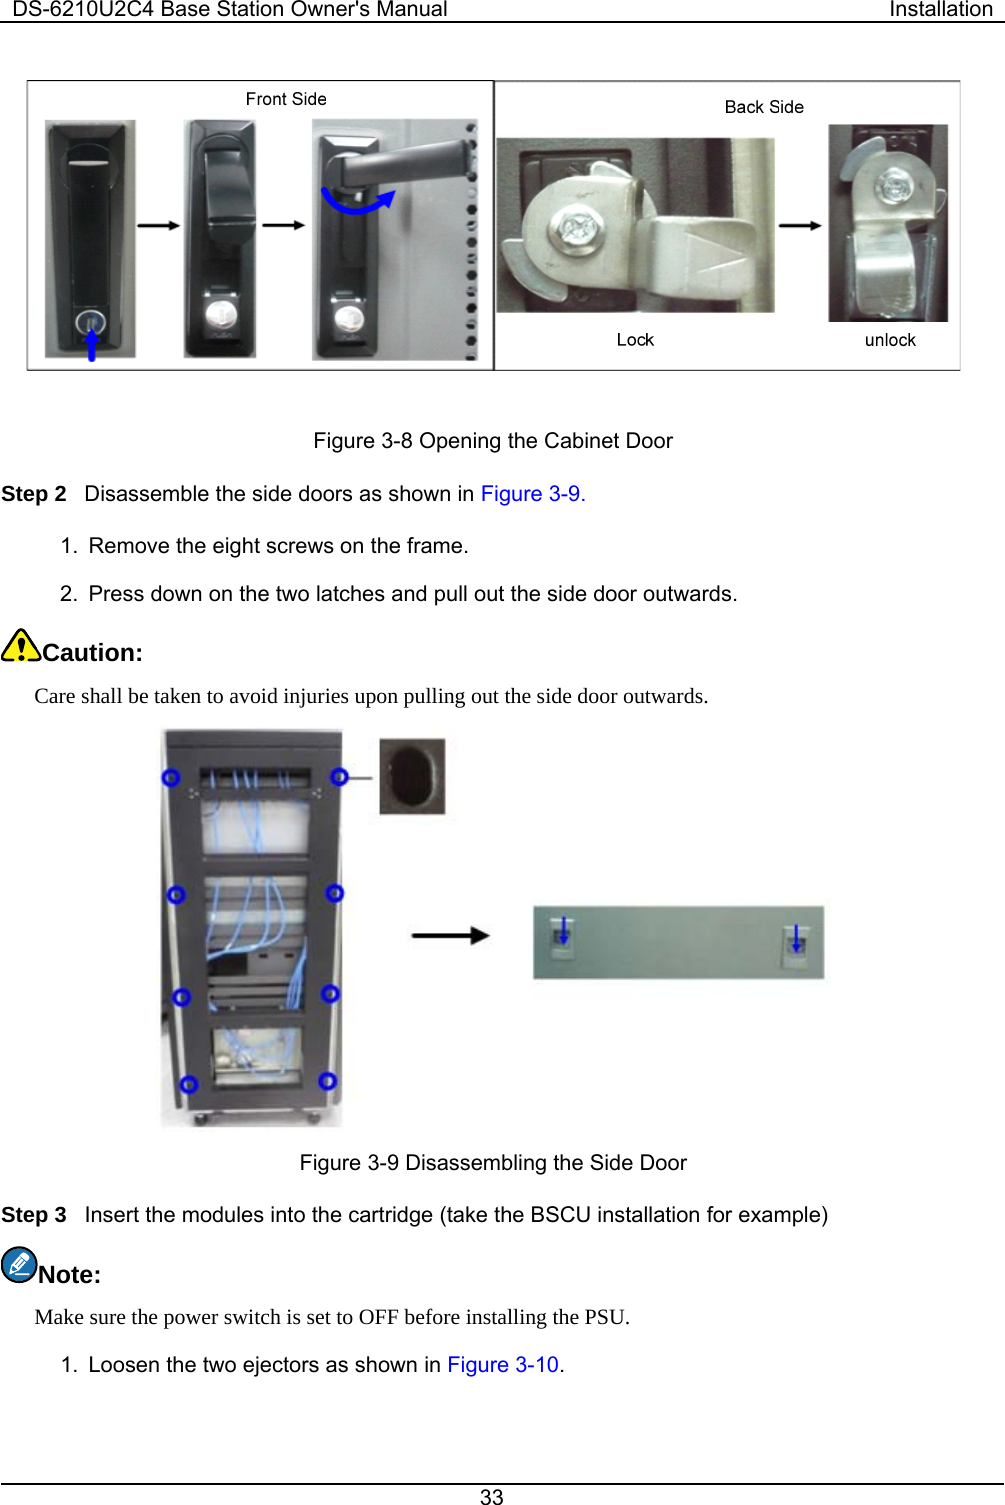 DS-6210U2C4 Base Station Owner&apos;s Manual  Installation 33   Figure 3-8 Opening the Cabinet Door Step 2  Disassemble the side doors as shown in Figure 3-9.    1.  Remove the eight screws on the frame.   2.  Press down on the two latches and pull out the side door outwards. Caution:  Care shall be taken to avoid injuries upon pulling out the side door outwards.    Figure 3-9 Disassembling the Side Door Step 3  Insert the modules into the cartridge (take the BSCU installation for example)   Note:  Make sure the power switch is set to OFF before installing the PSU.     1.  Loosen the two ejectors as shown in Figure 3-10. 